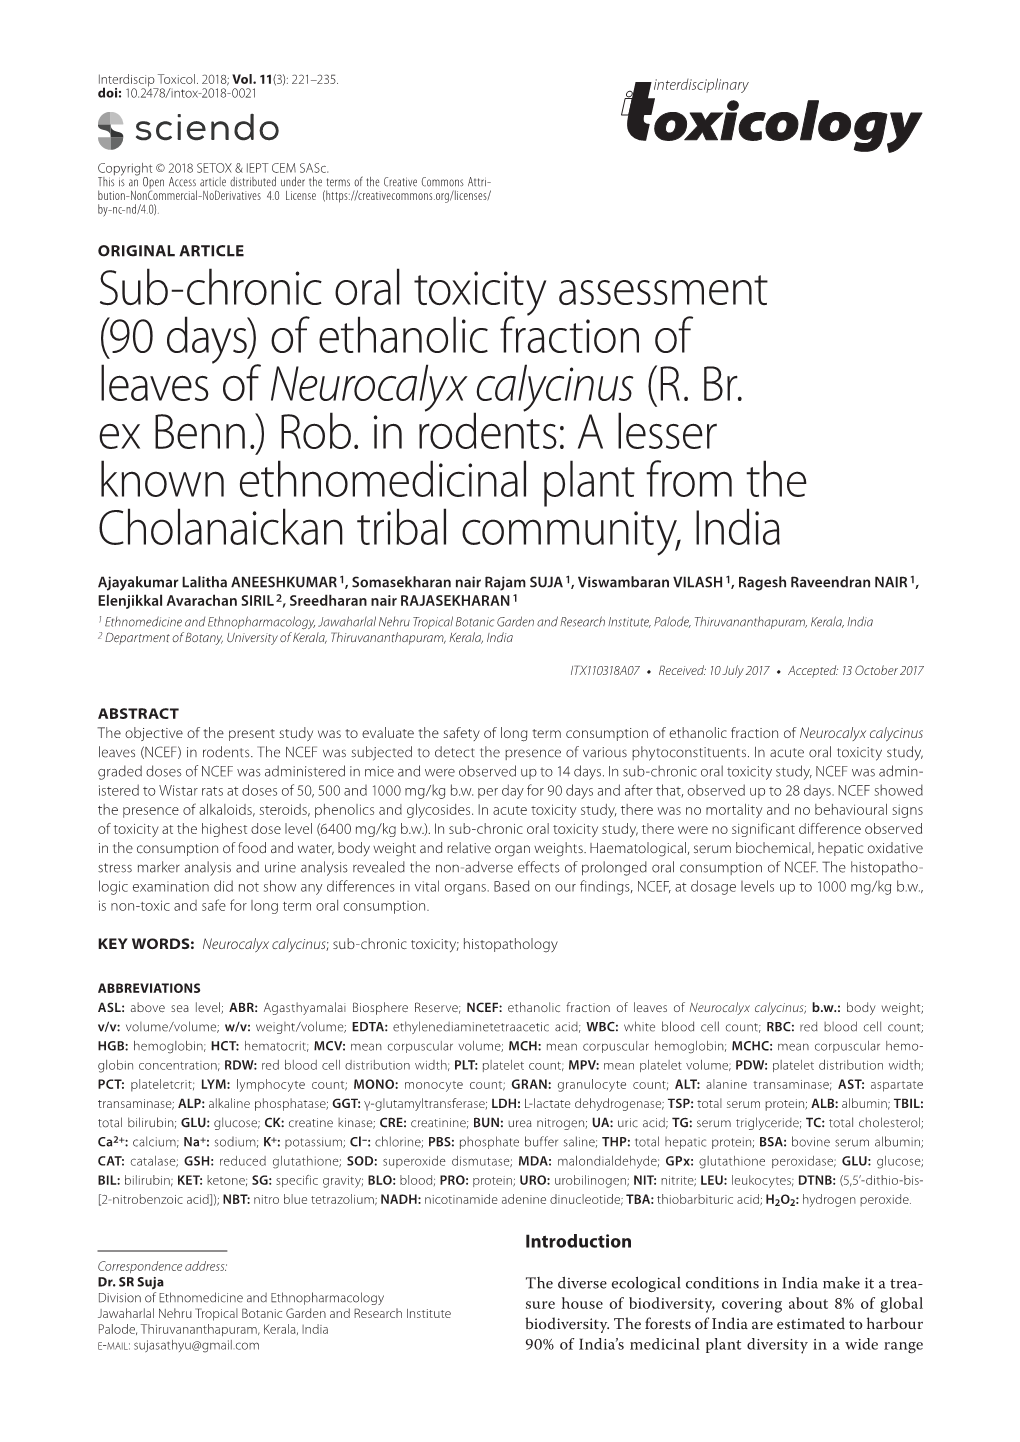 Sub-Chronic Oral Toxicity Assessment (90 Days) of Ethanolic Fraction of Leaves of Neurocalyx Calycinus (R